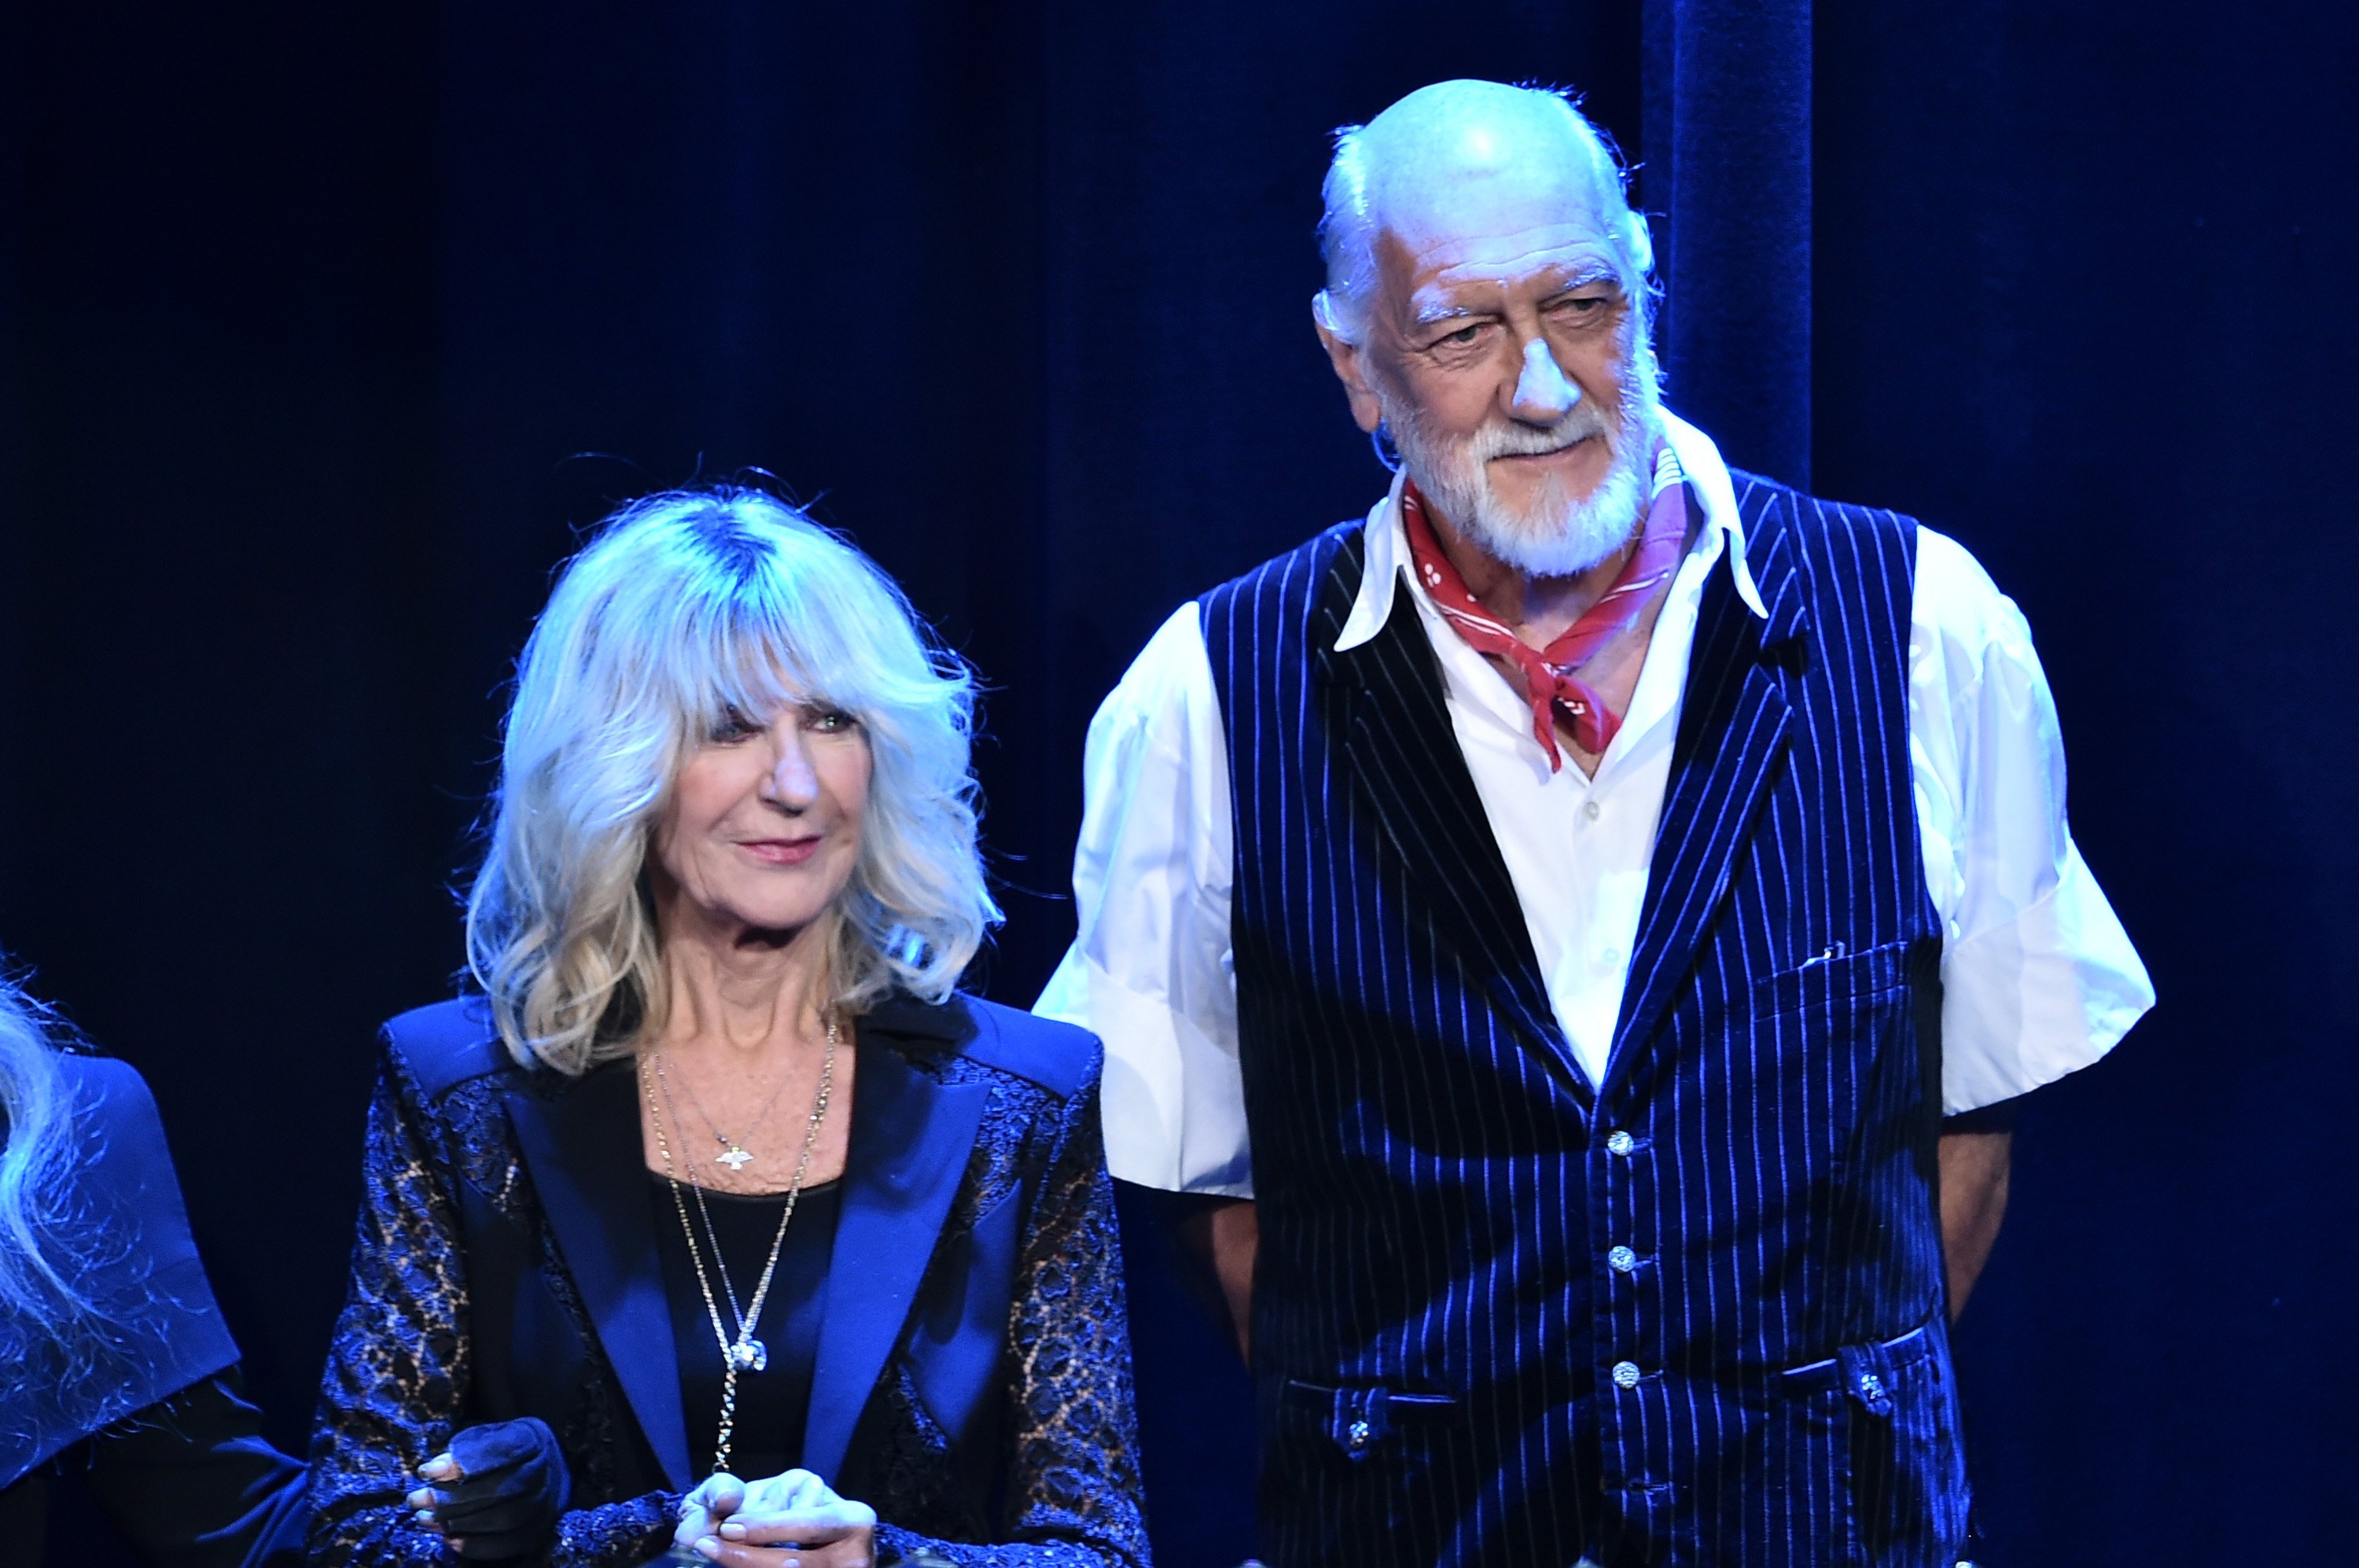 Christine McVie and Mick Fleetwood stand side-by-side in dark blue outfits